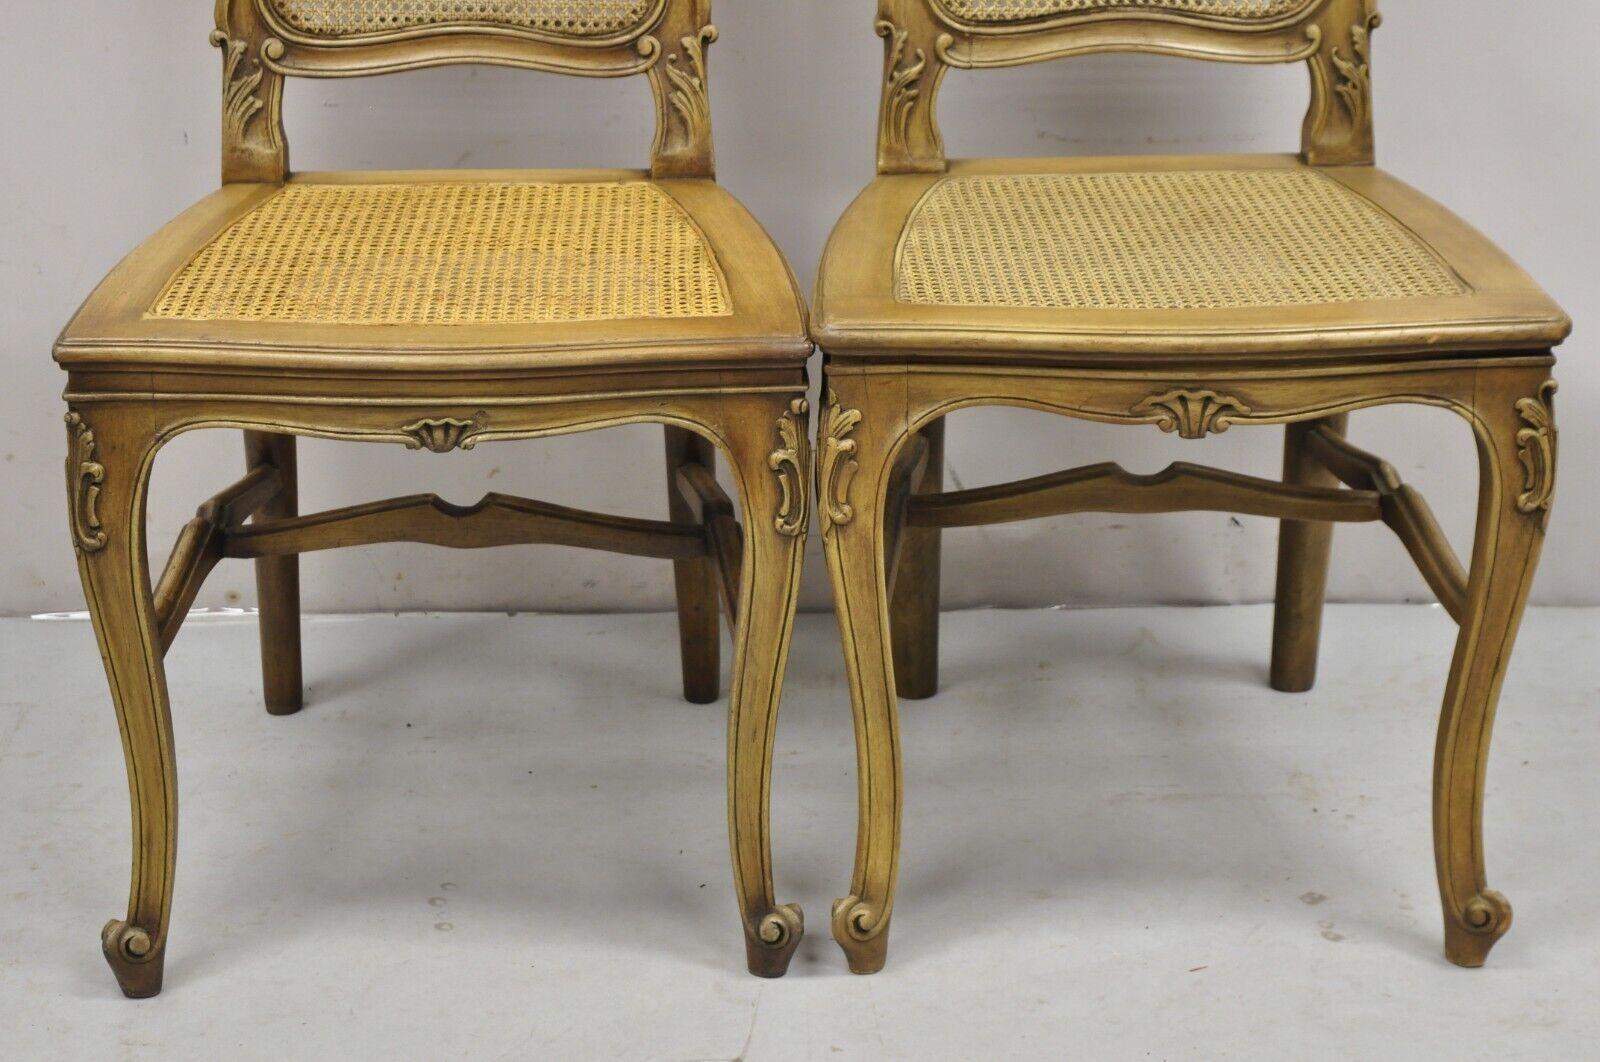 20th Century Antique French Provincial Louis XV Style Carved Walnut Cane Dining Chair - Pair For Sale